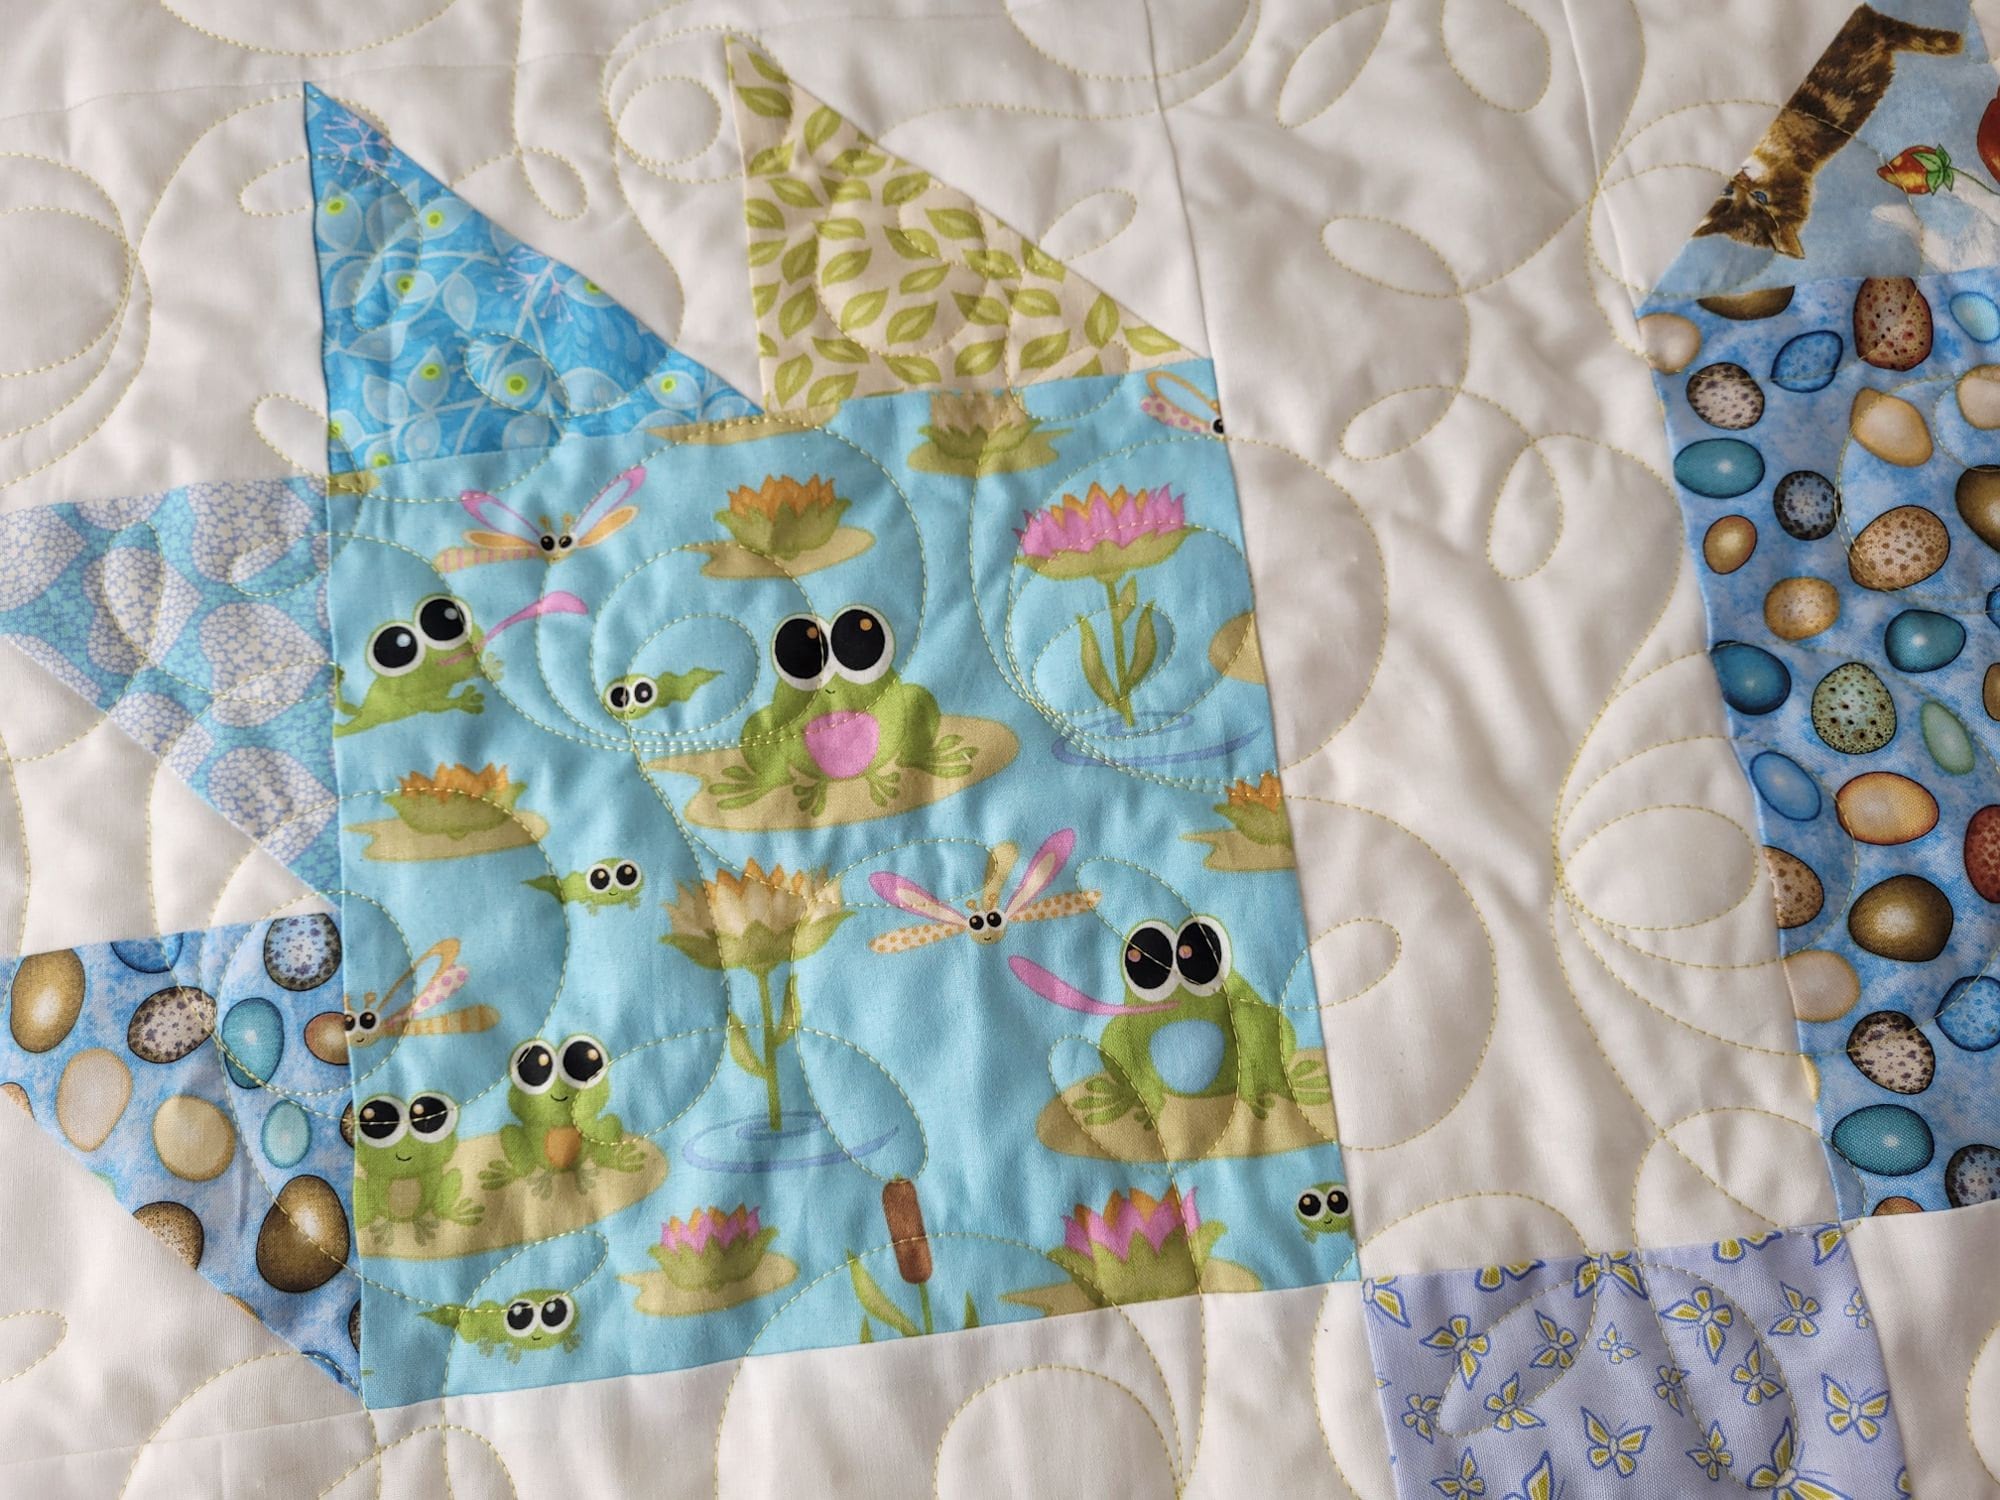 cute baby quilt with frogs and other animal theme fabrics